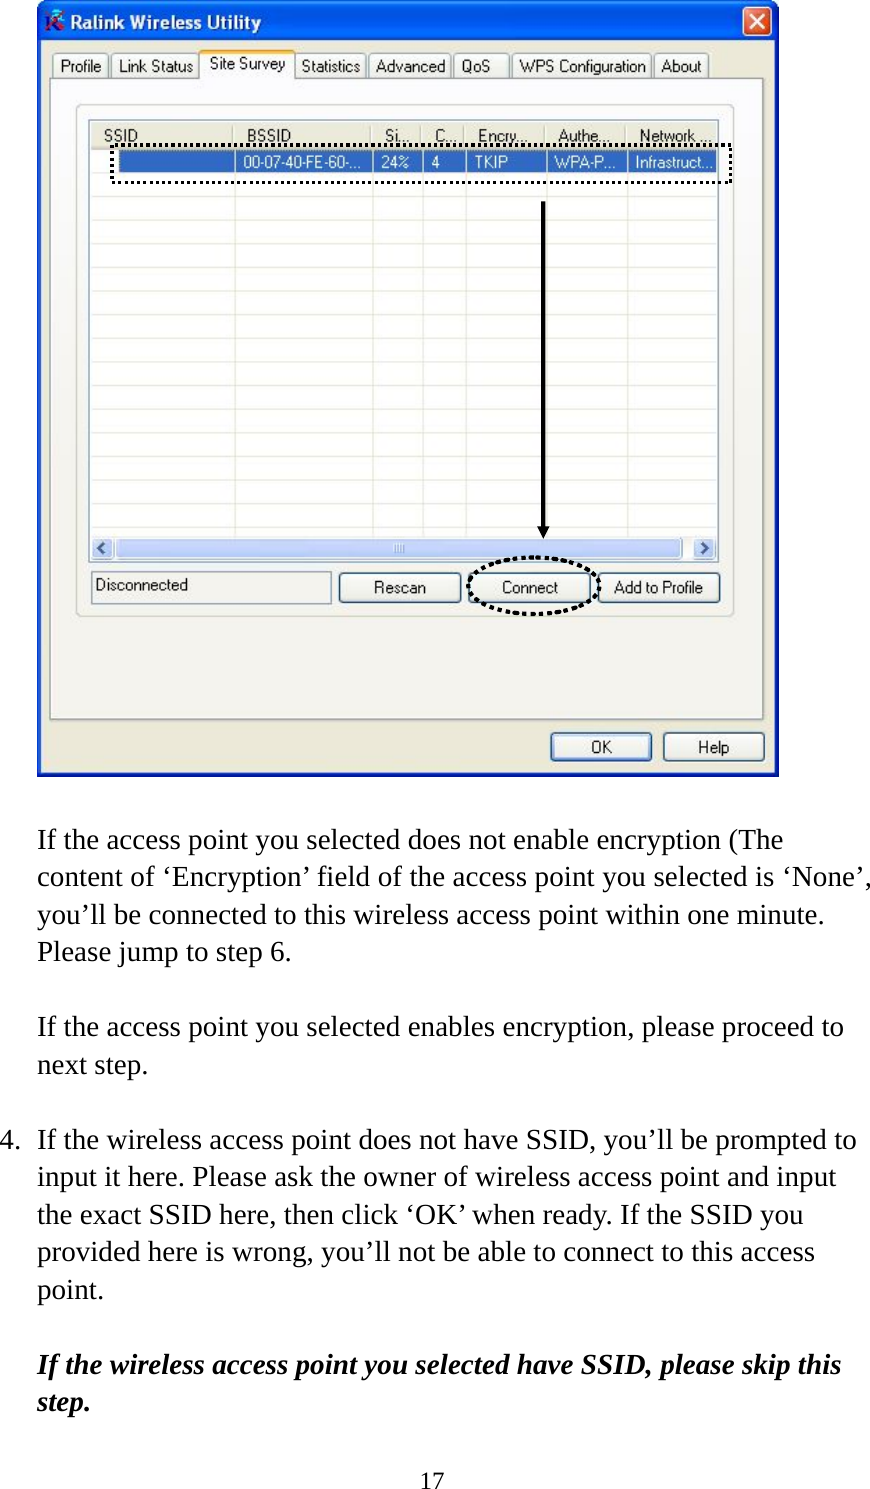  17  If the access point you selected does not enable encryption (The content of ‘Encryption’ field of the access point you selected is ‘None’, you’ll be connected to this wireless access point within one minute. Please jump to step 6.  If the access point you selected enables encryption, please proceed to next step.  4. If the wireless access point does not have SSID, you’ll be prompted to input it here. Please ask the owner of wireless access point and input the exact SSID here, then click ‘OK’ when ready. If the SSID you provided here is wrong, you’ll not be able to connect to this access point.  If the wireless access point you selected have SSID, please skip this step. 